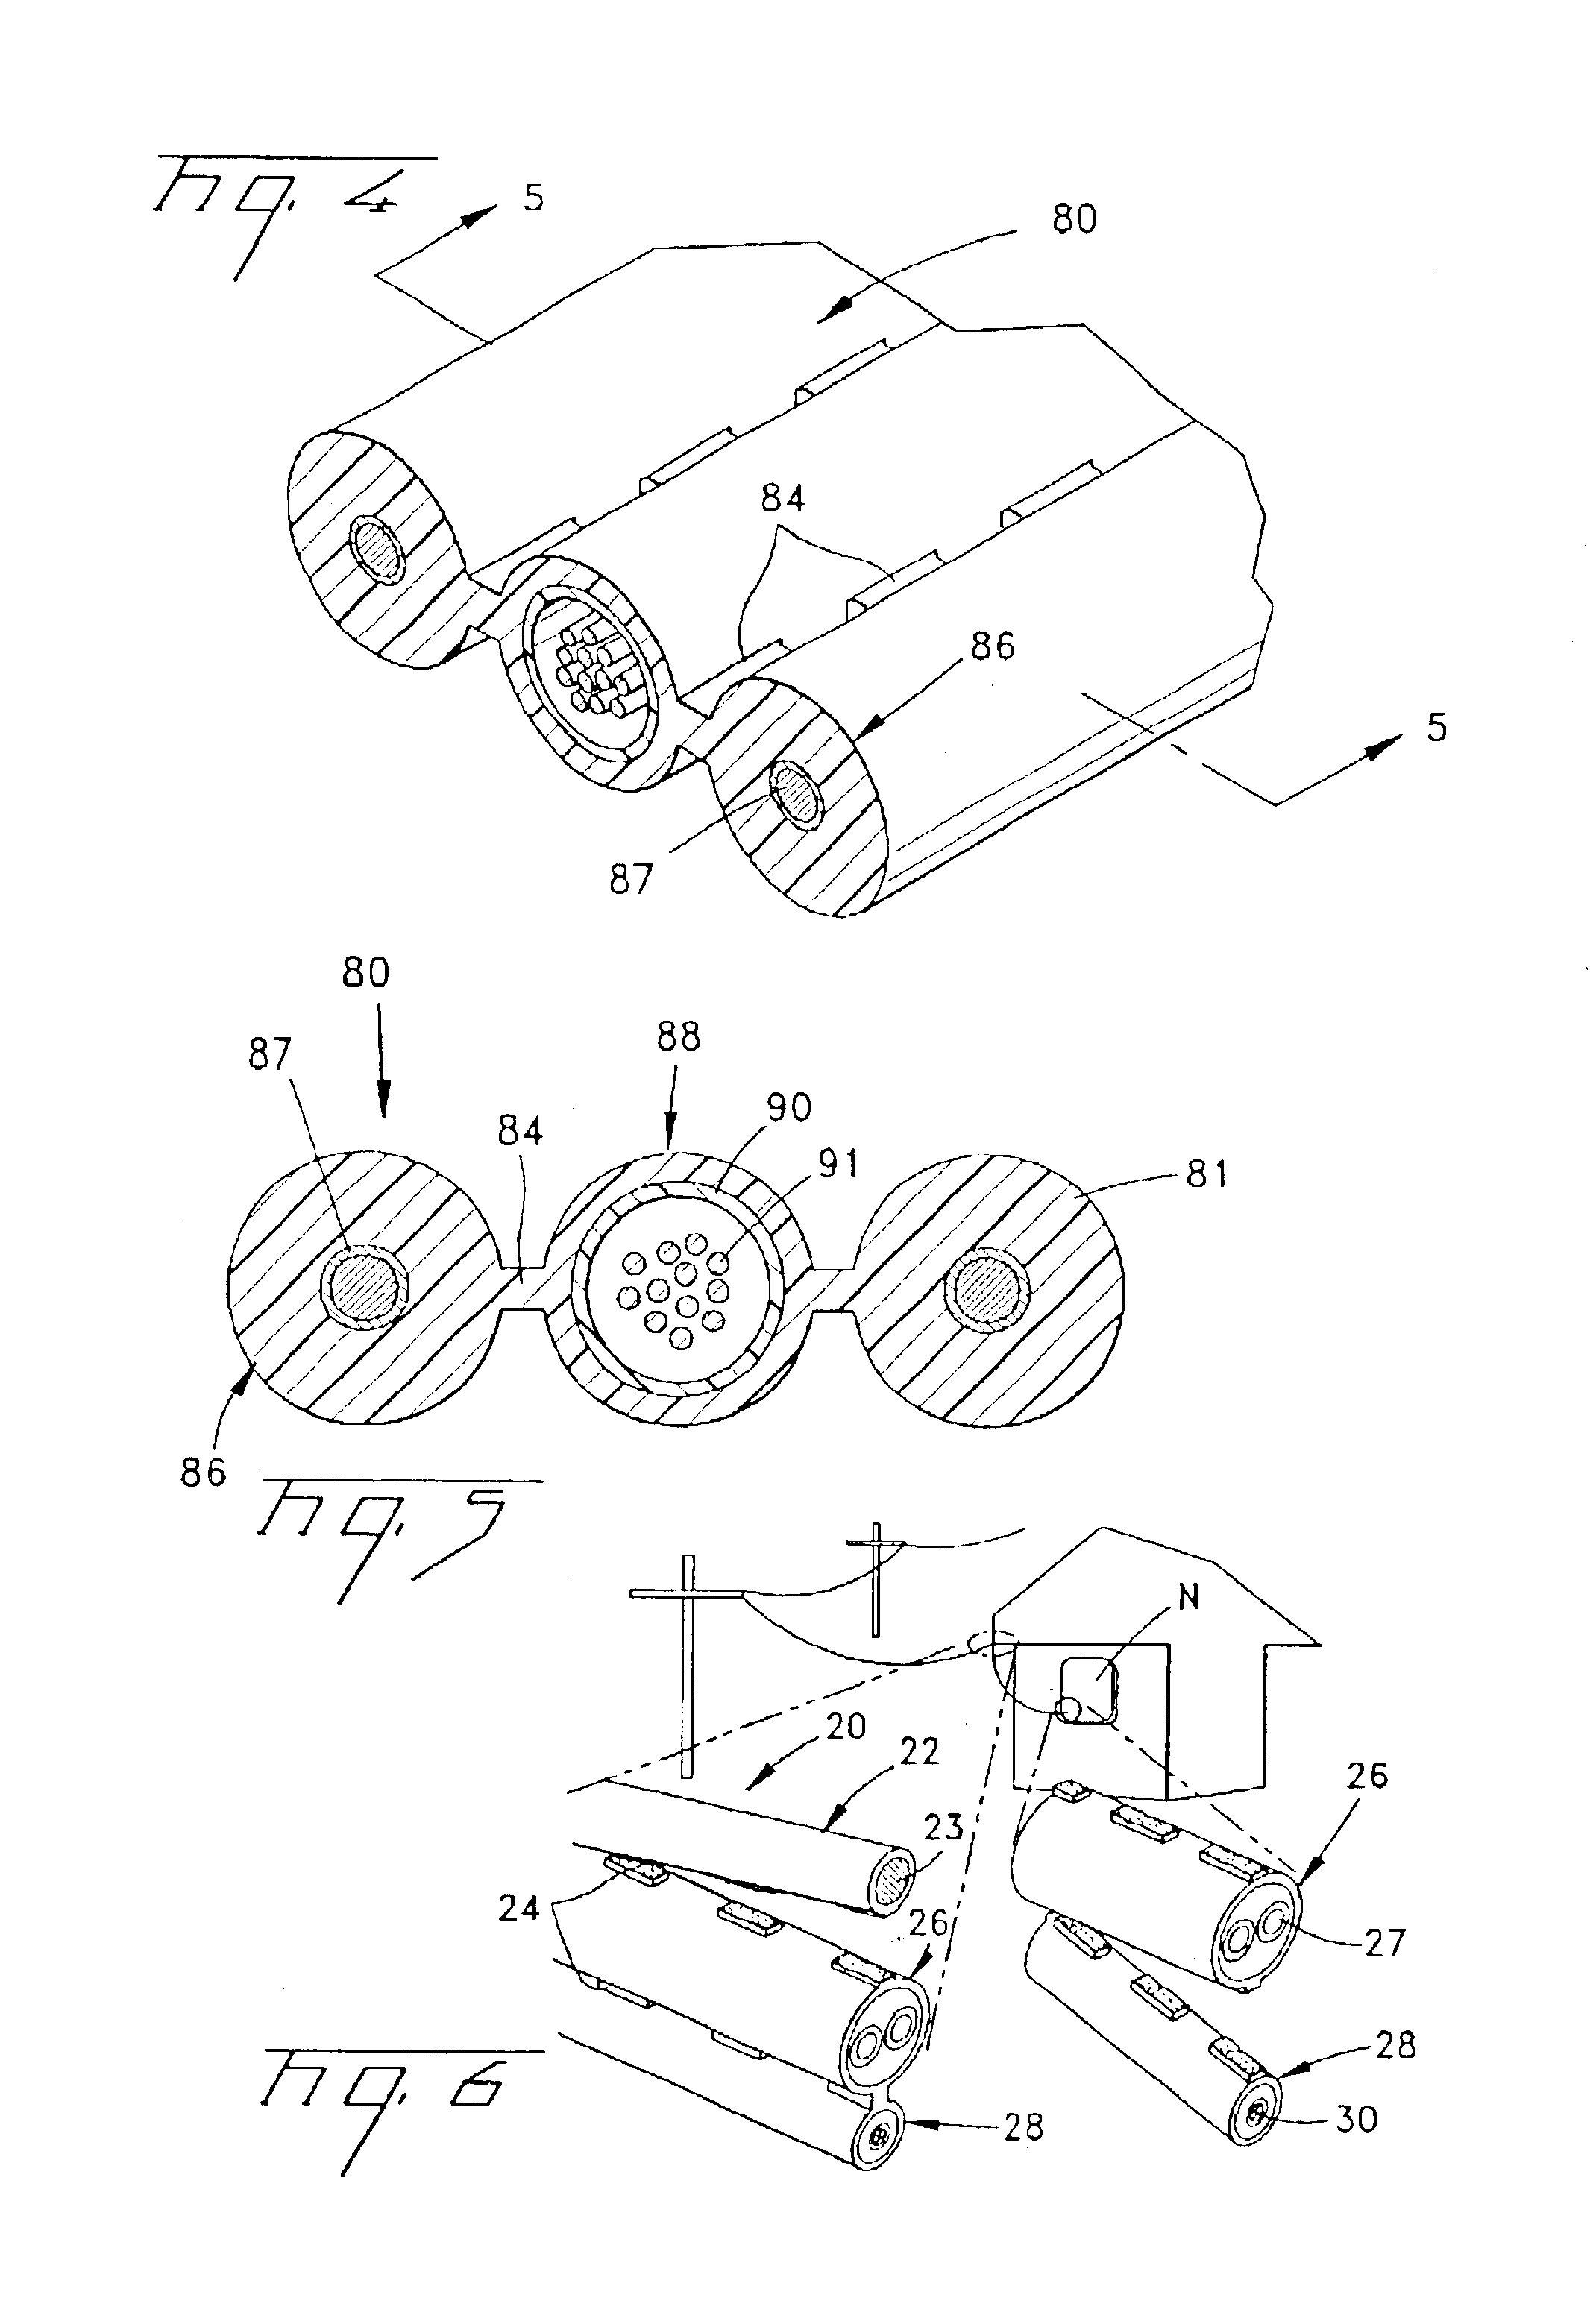 Self-supporting cables and an apparatus and methods for making the same